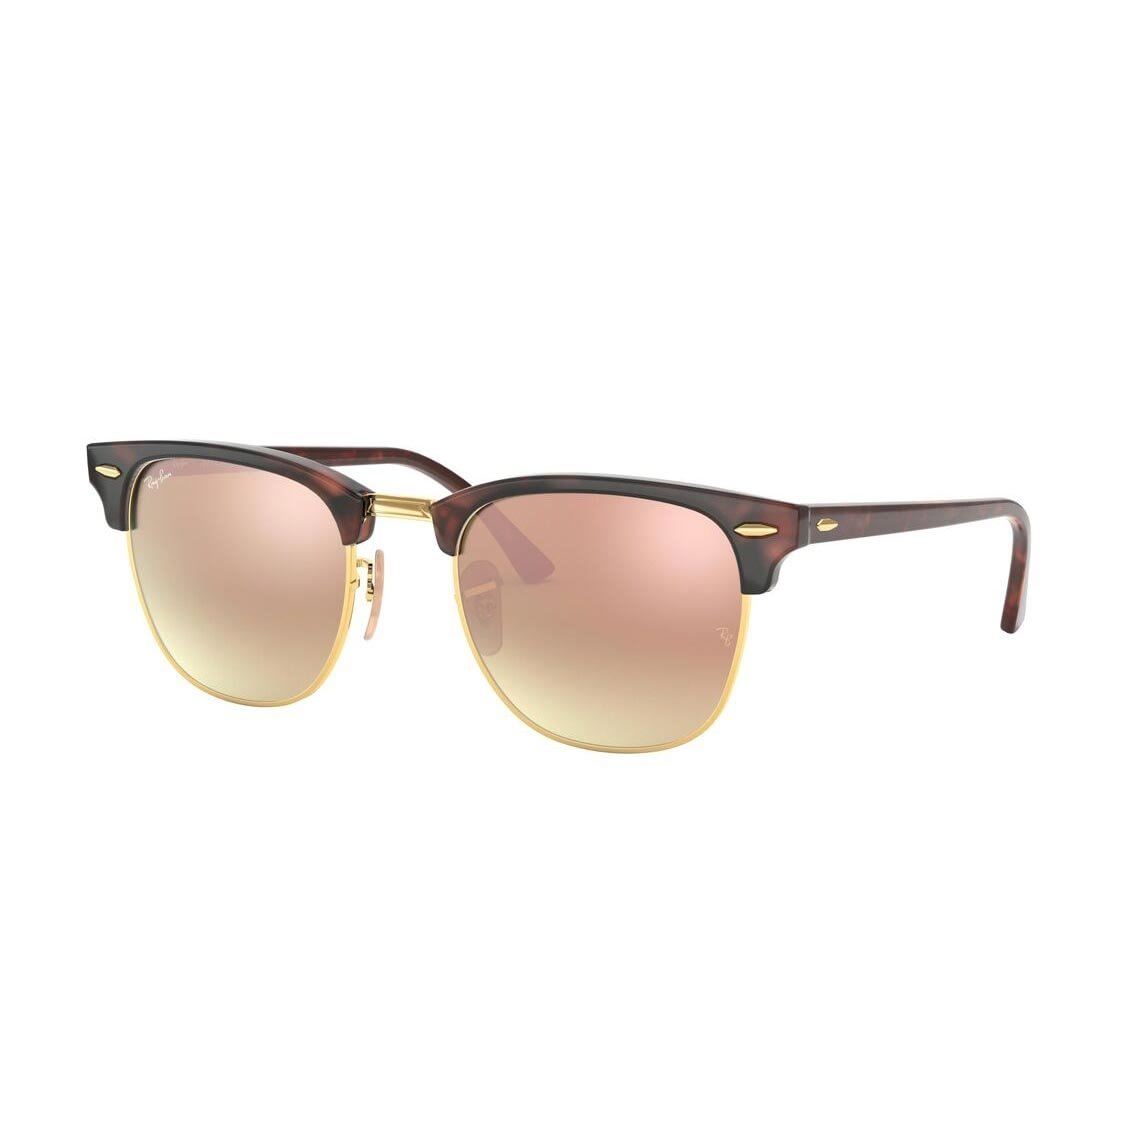 Ray-Ban Clubmaster RB3016 990/7O 49